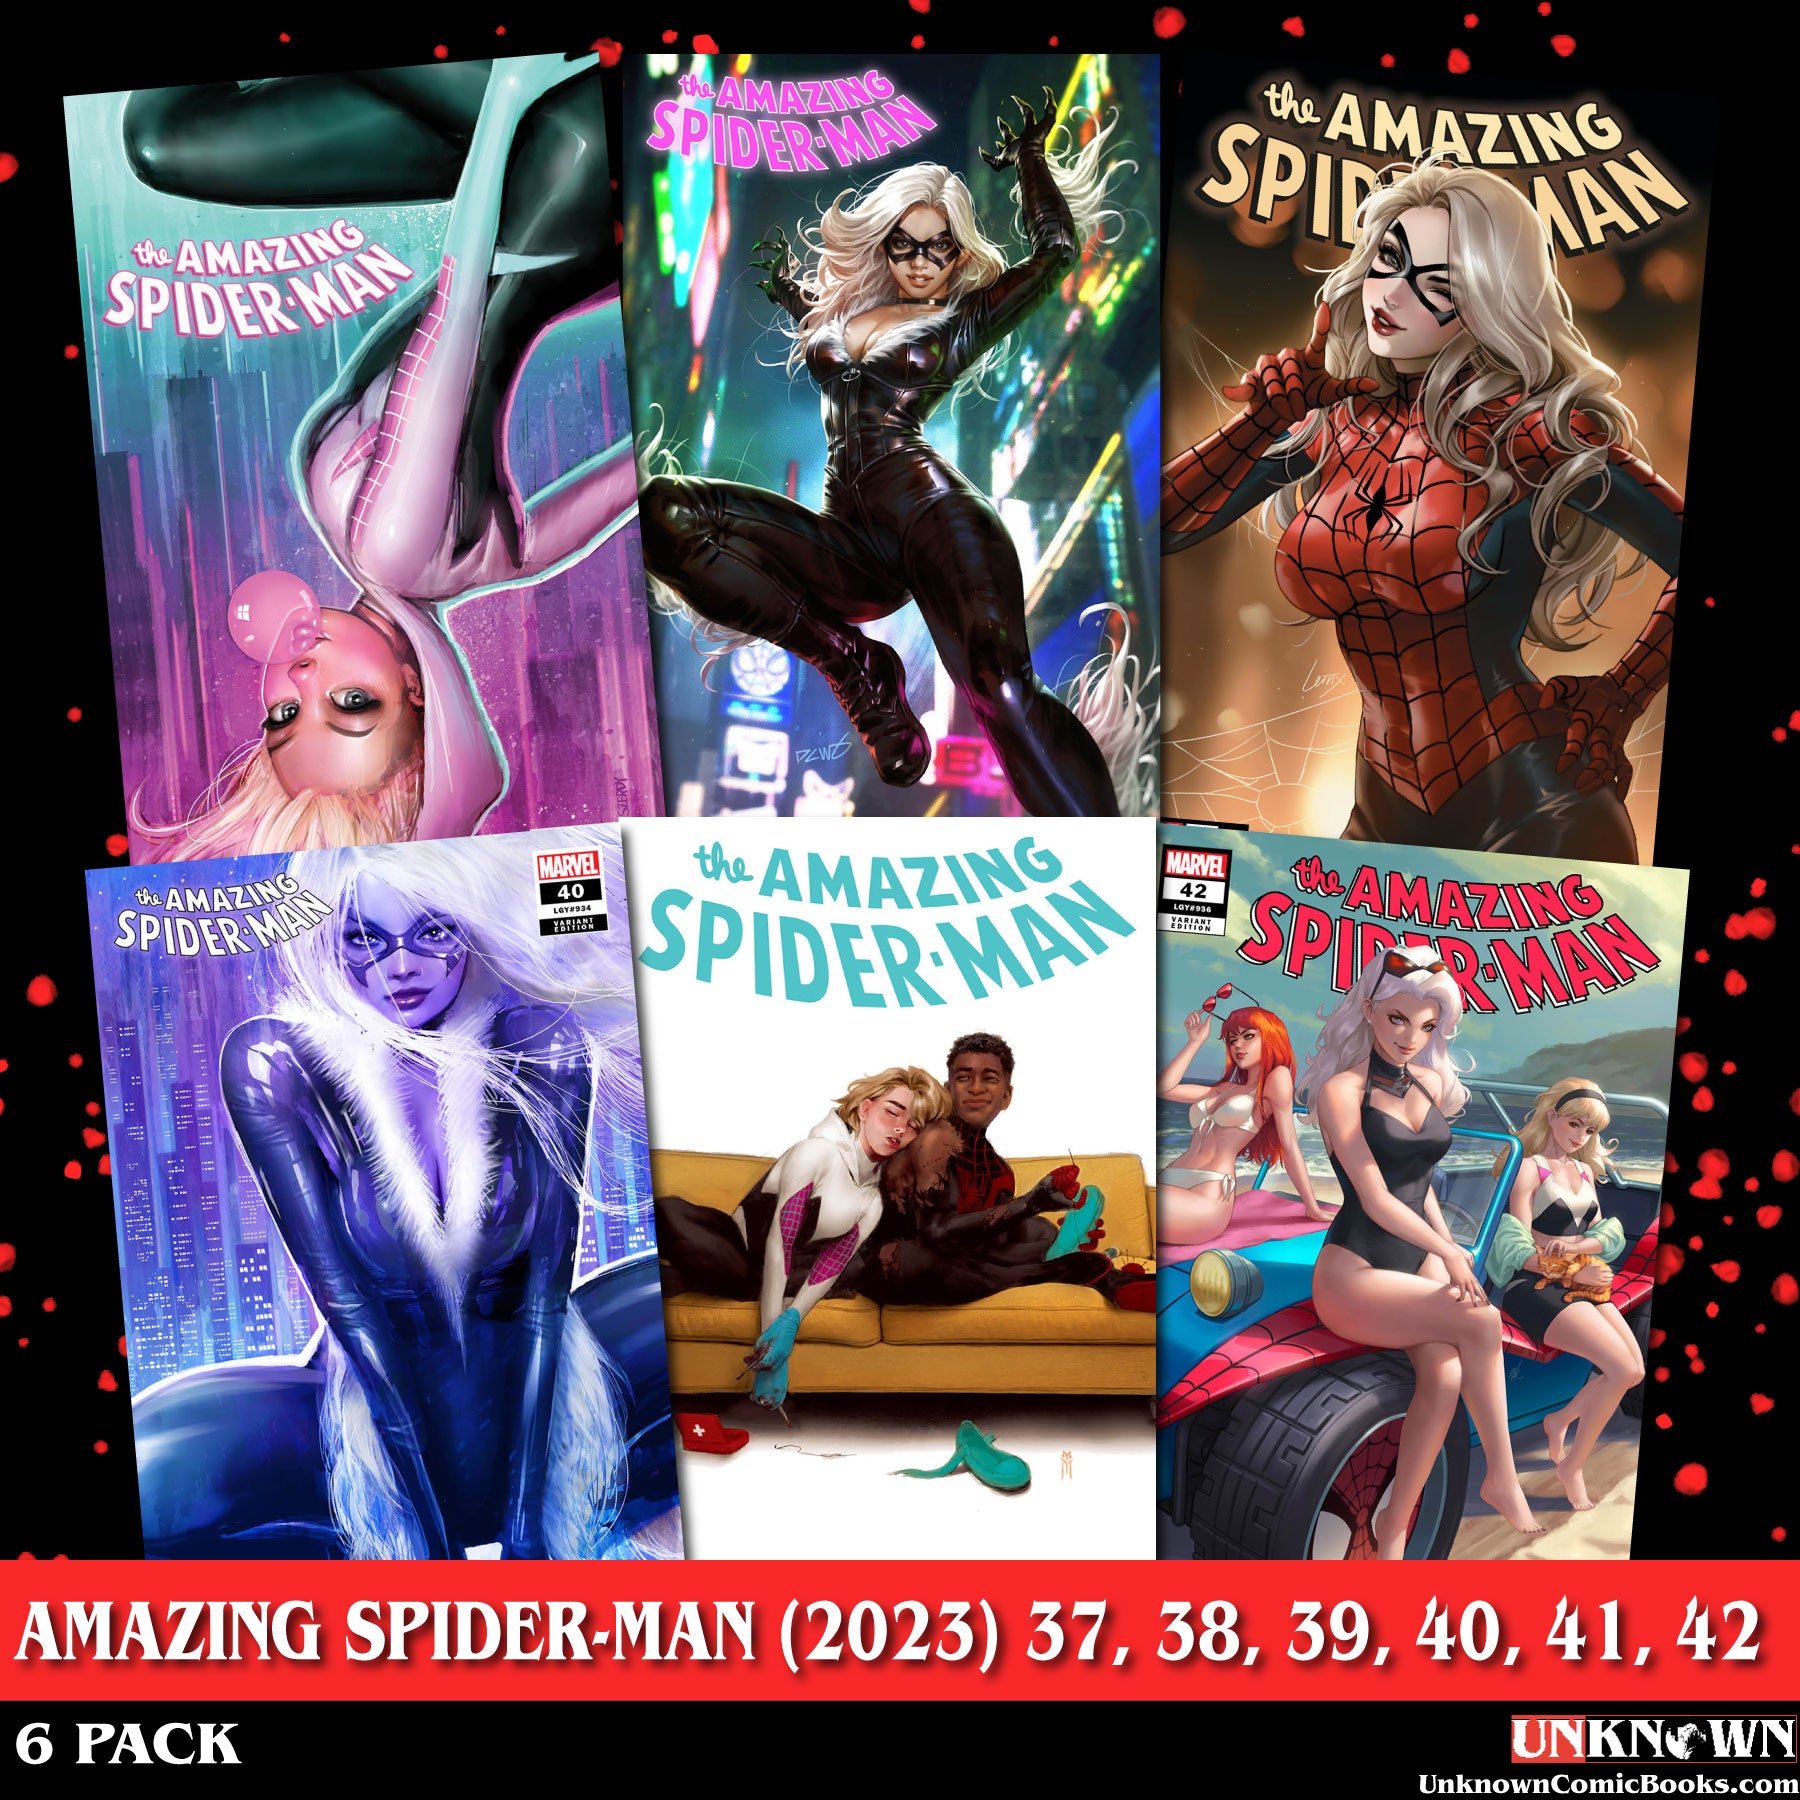 [6 PACK TRADE] AMAZING SPIDER-MAN (37-42) #37 #38 #39 #40 #41 #42 UNKNOWN COMICS EXCLUSIVE VAR (01/17/2024)